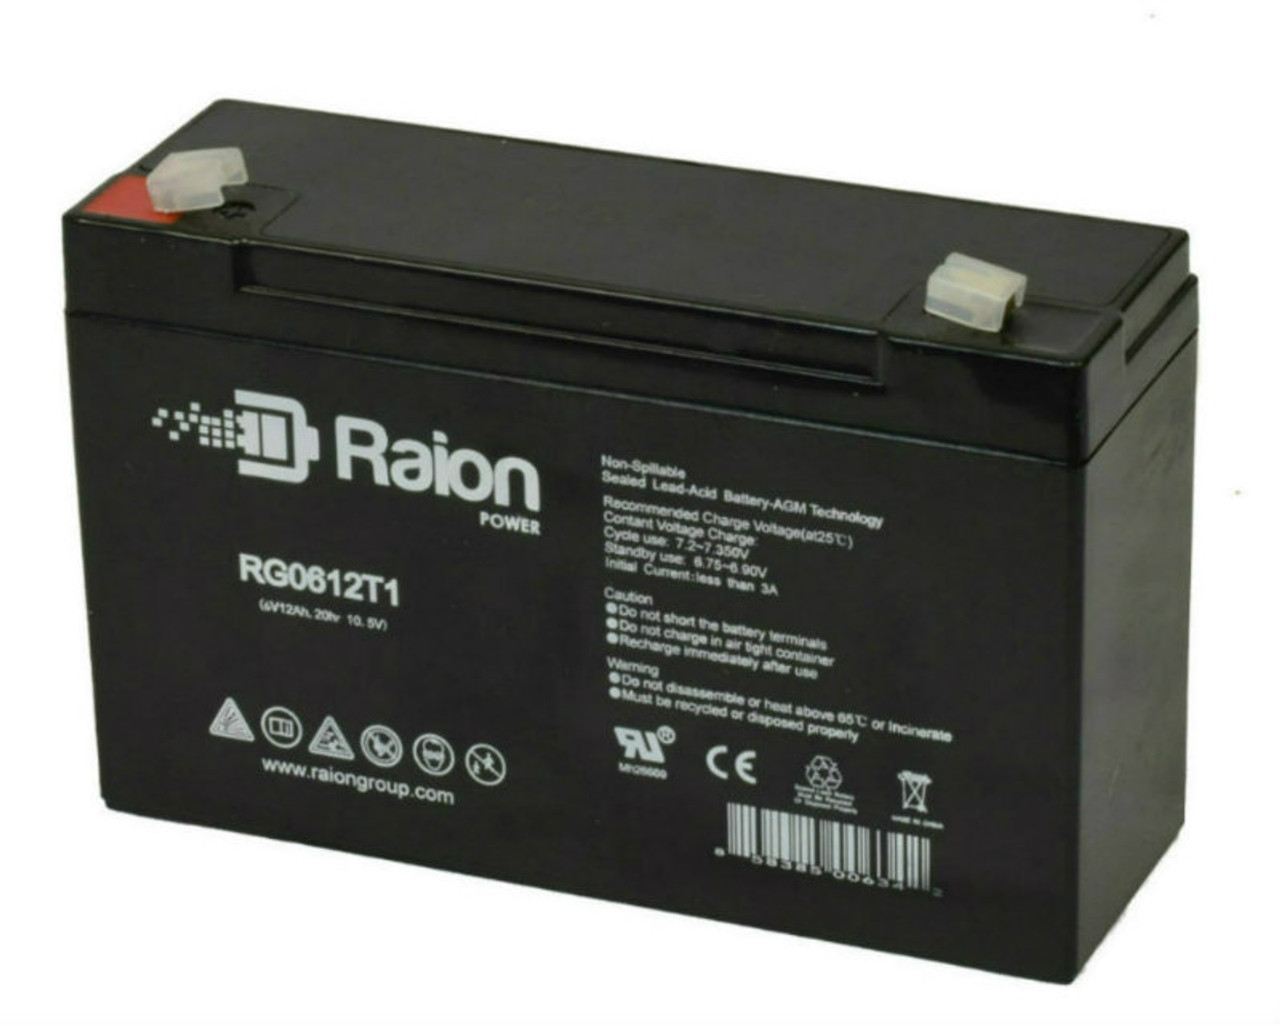 Raion Power RG06120T1 Replacement Battery for GP DC12-6